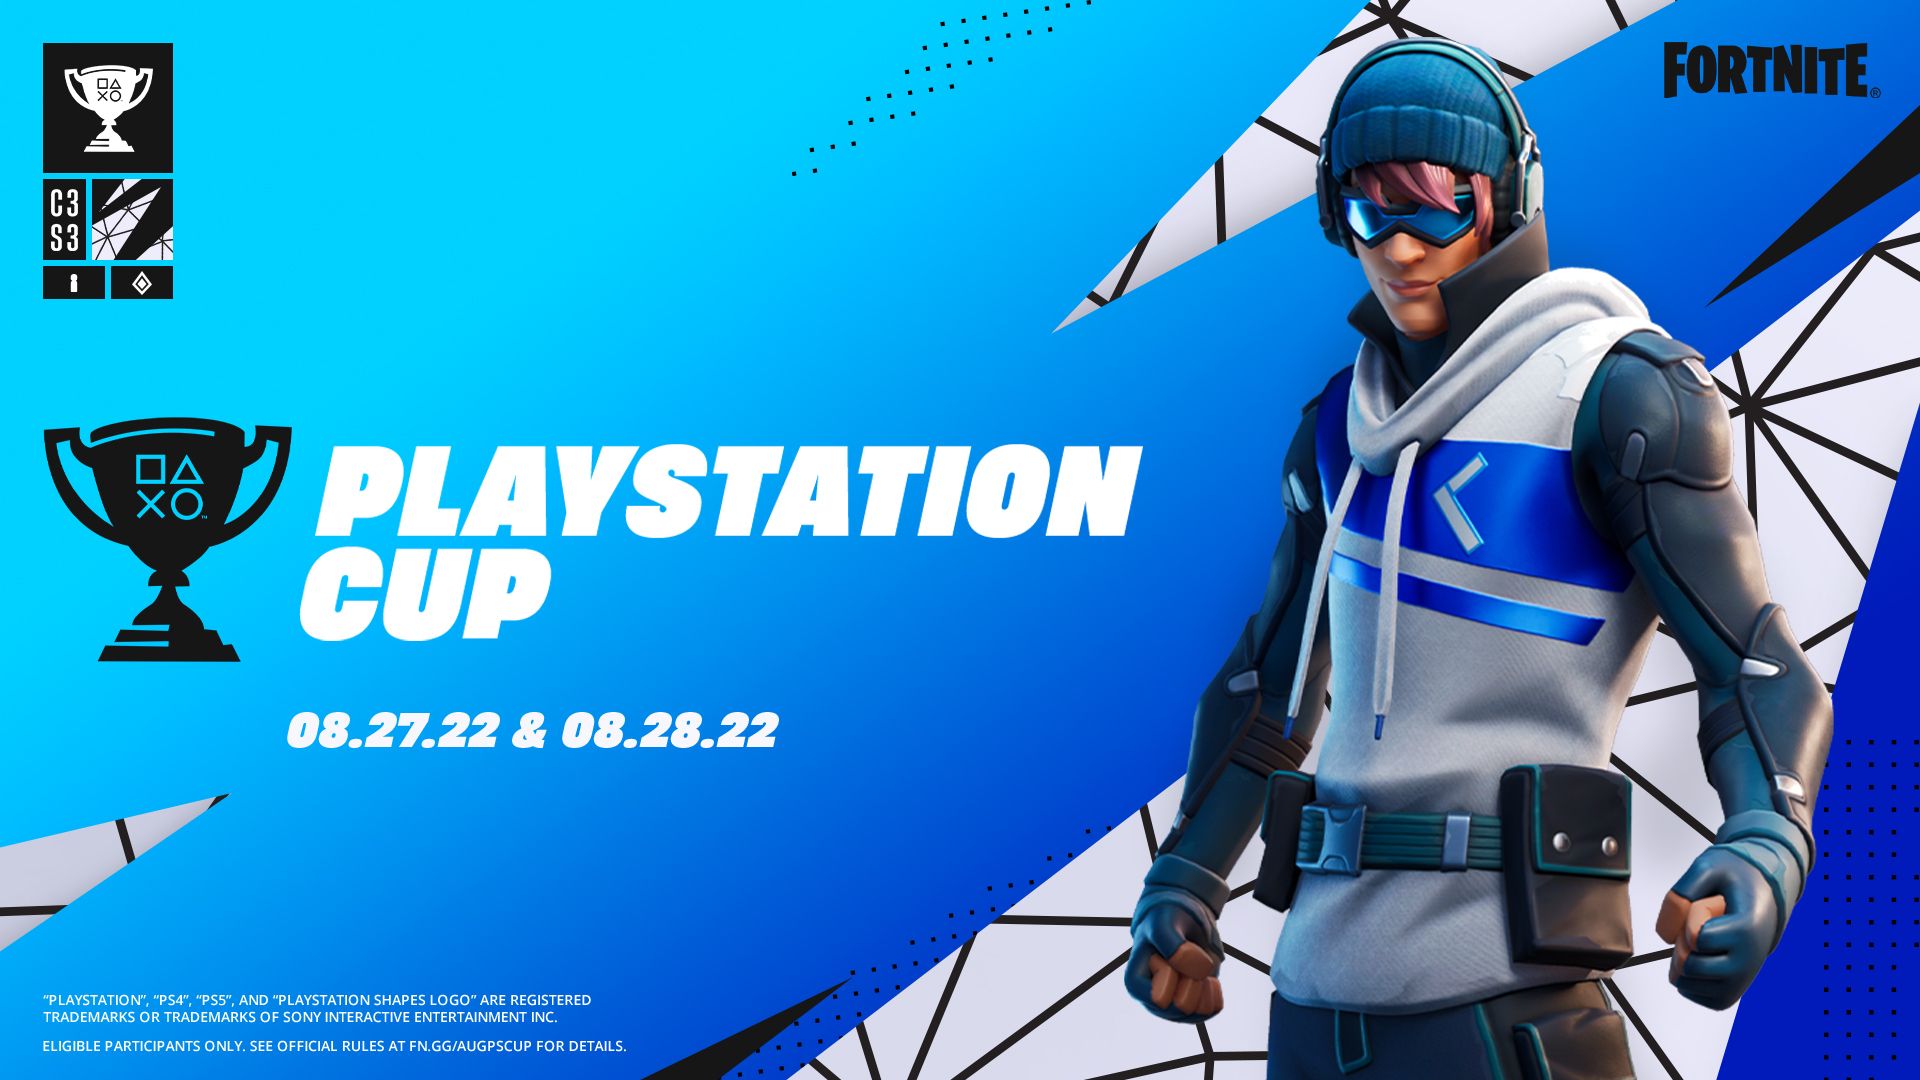 Fortnite 100k+ PlayStation Cup August 2022 Dates, Qualifiers & Free